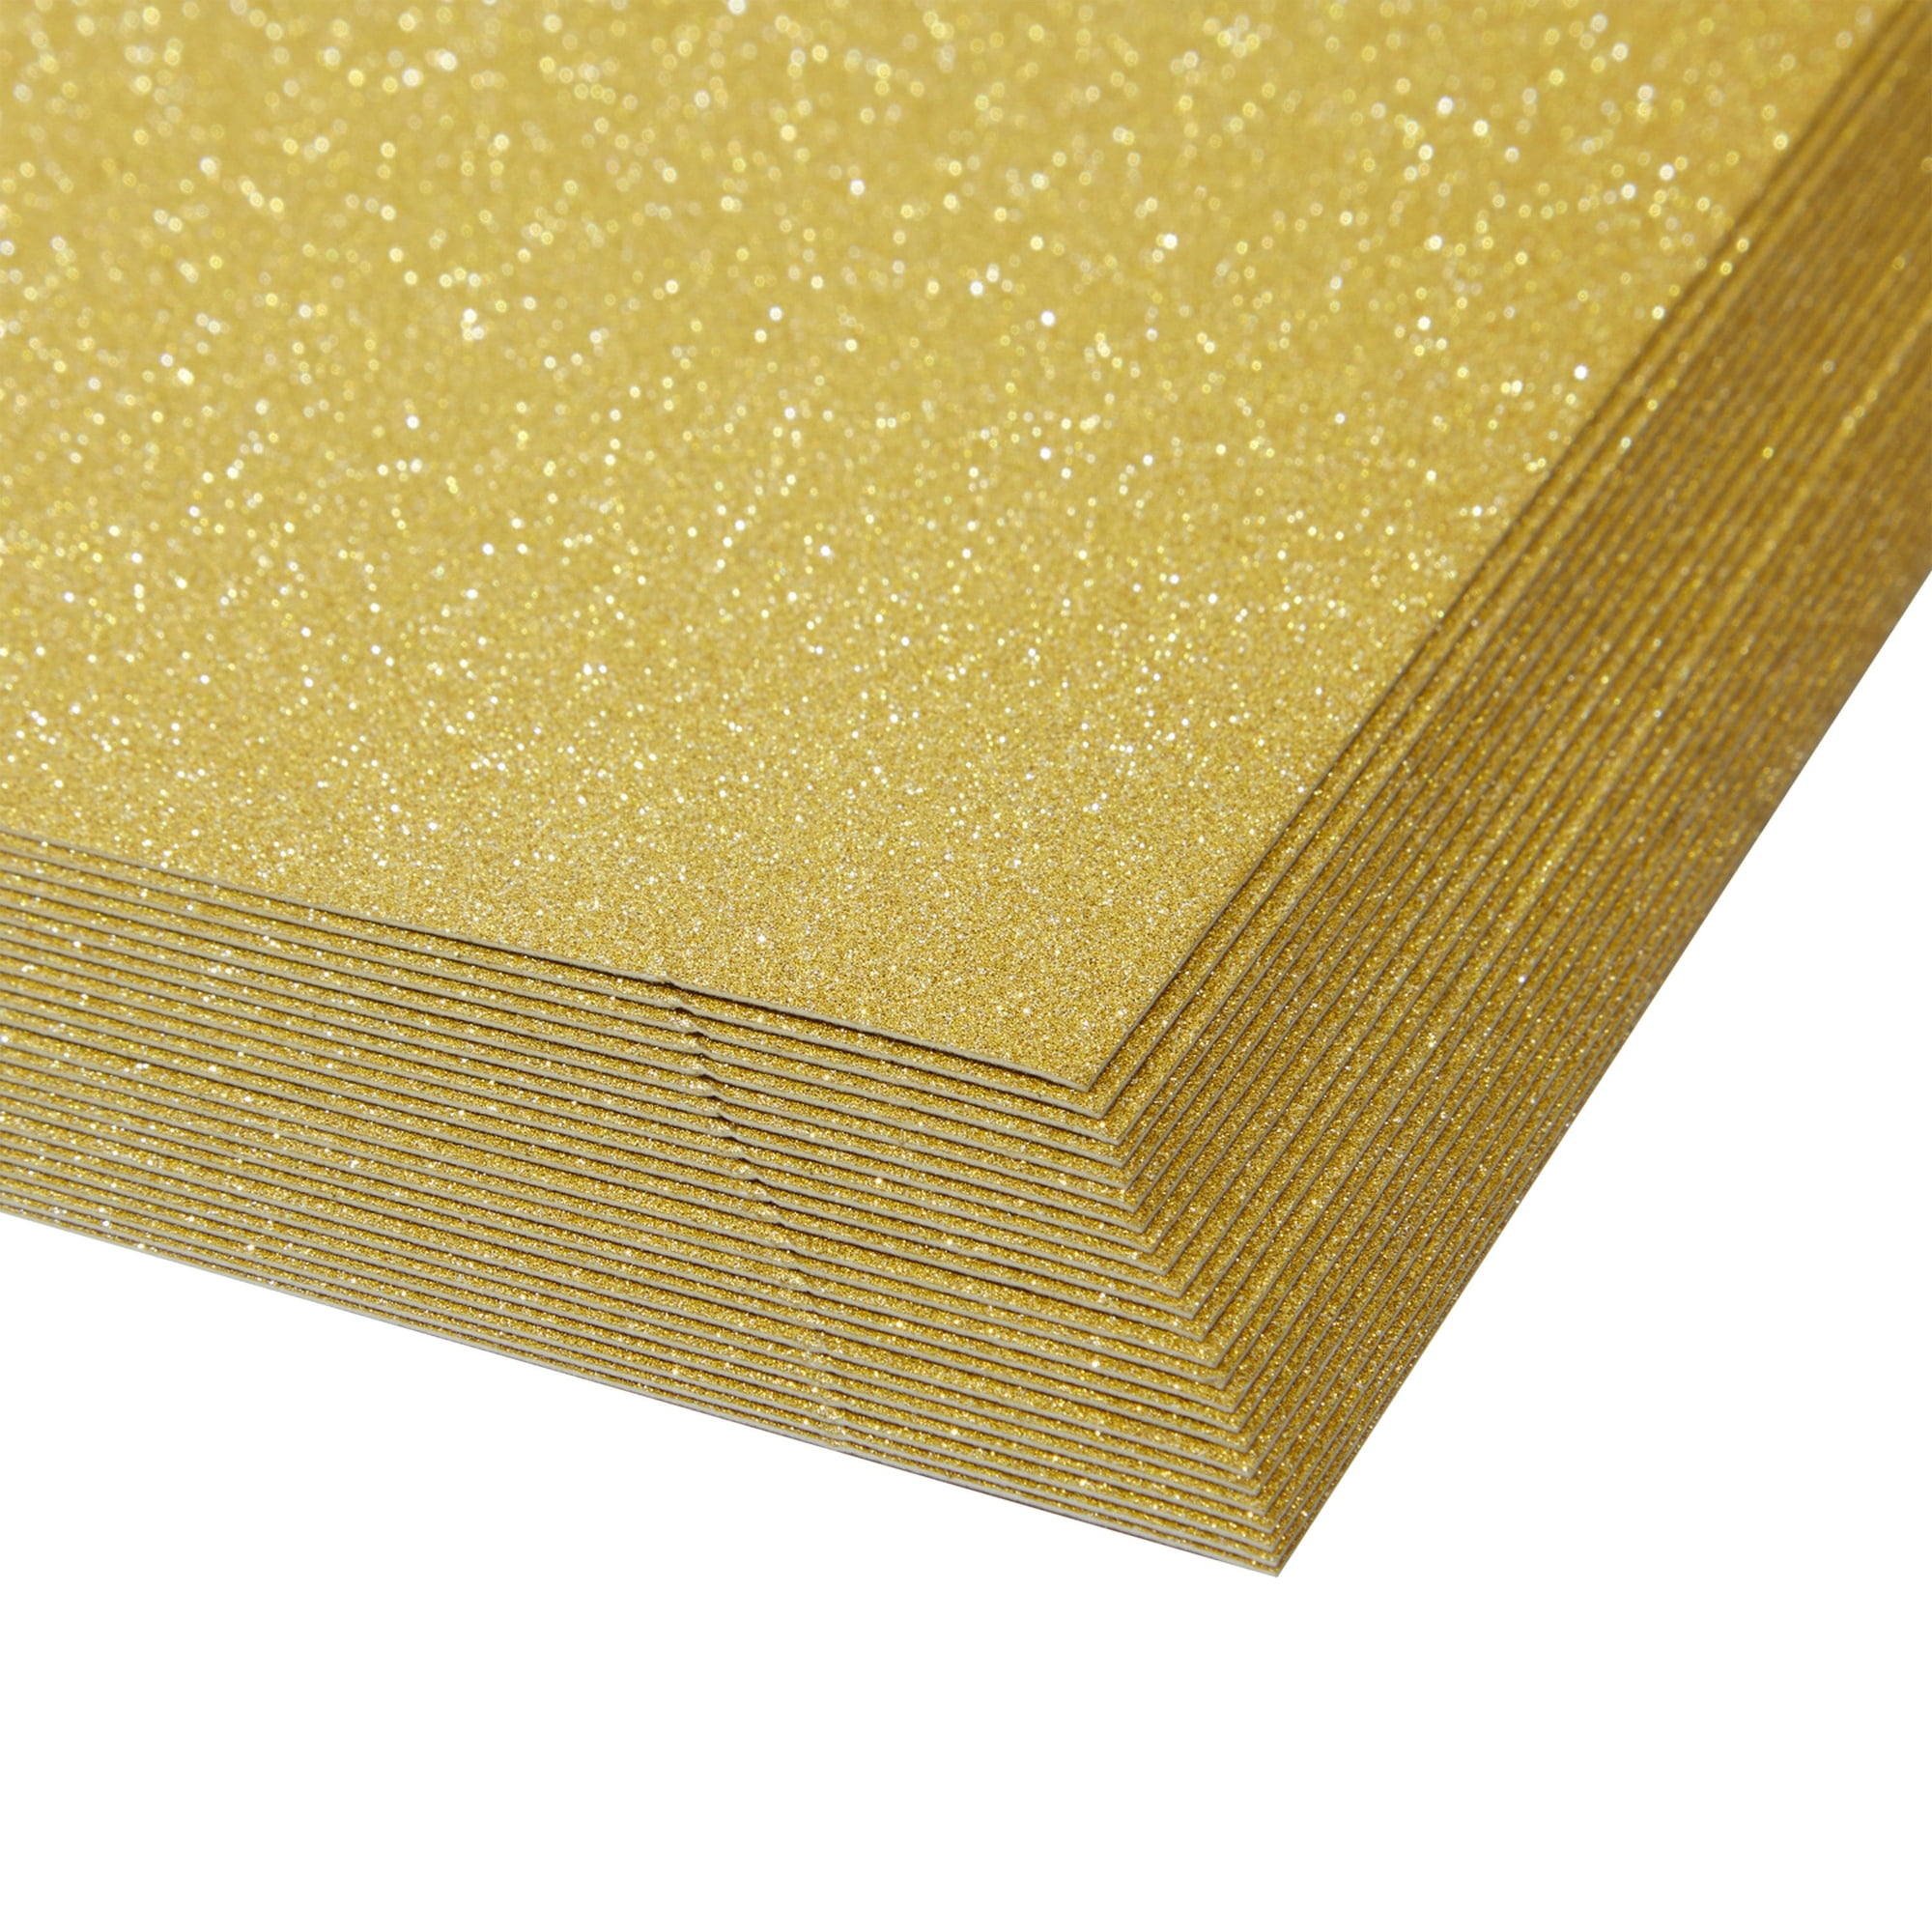 10pcs/pack 2MM Thick A4 with Gold Powder Sheet Material Glitter